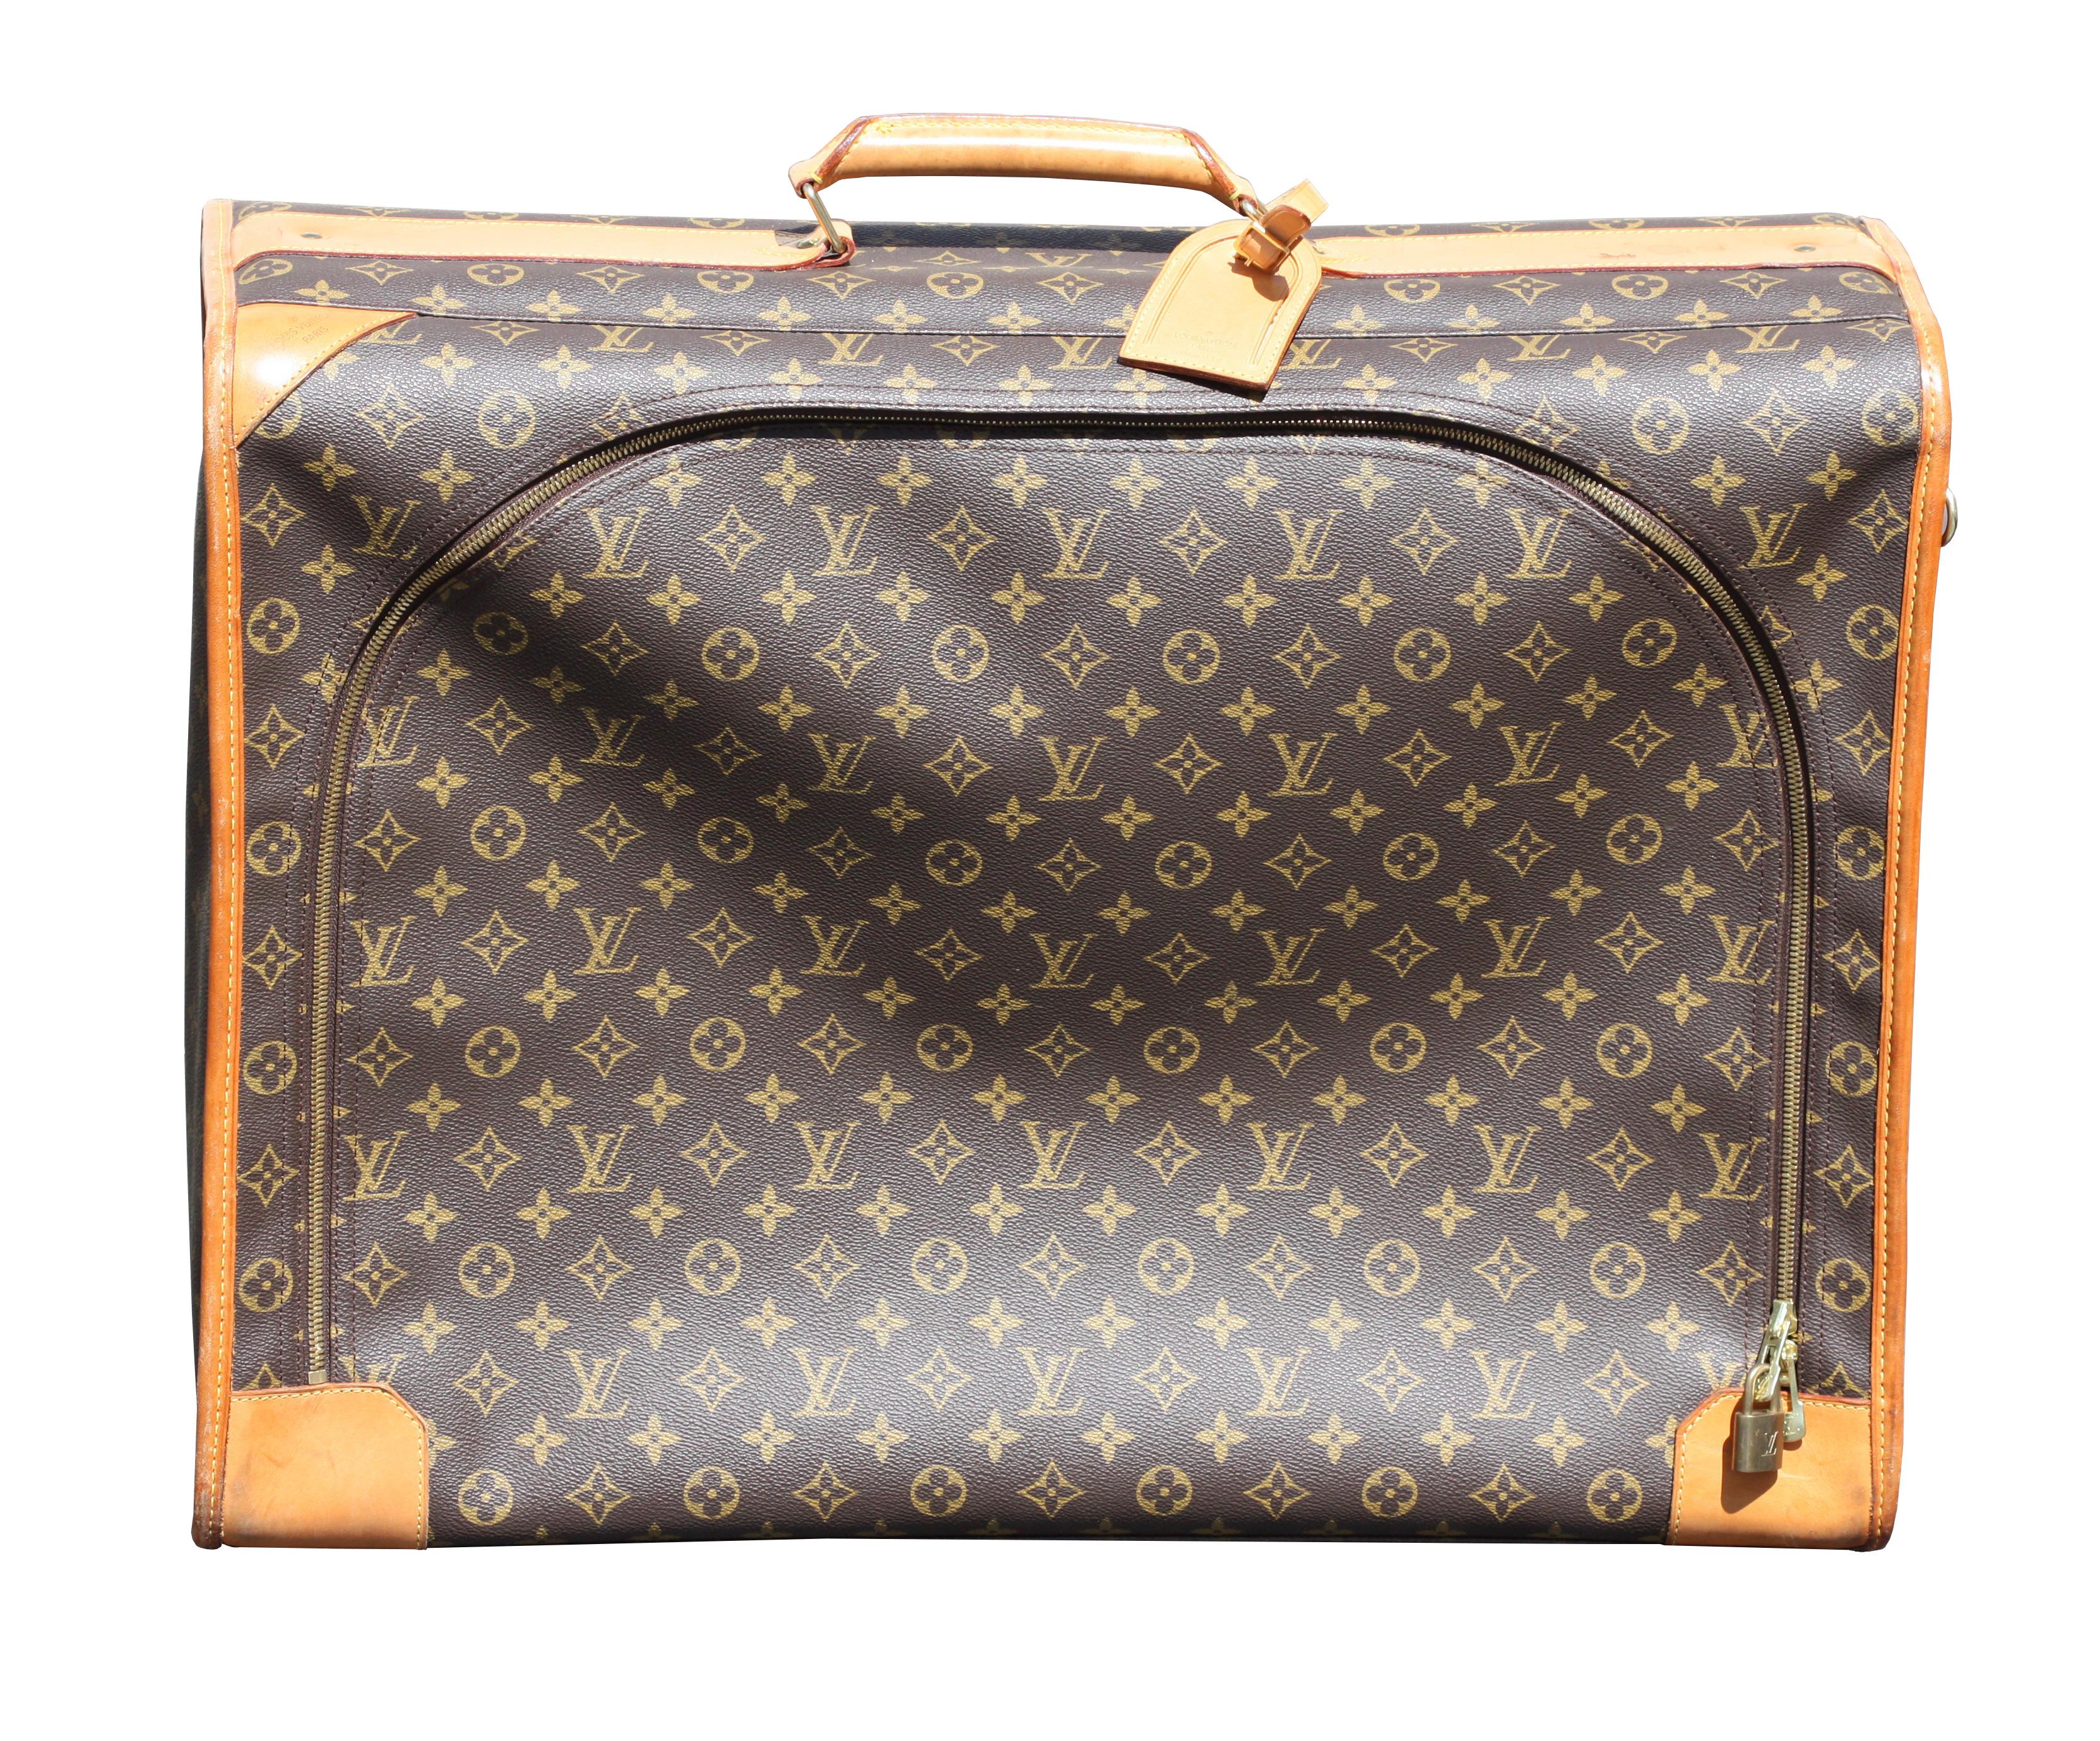 Collection of Four Louis Vuitton Suitcases with Monogram Pattern 1